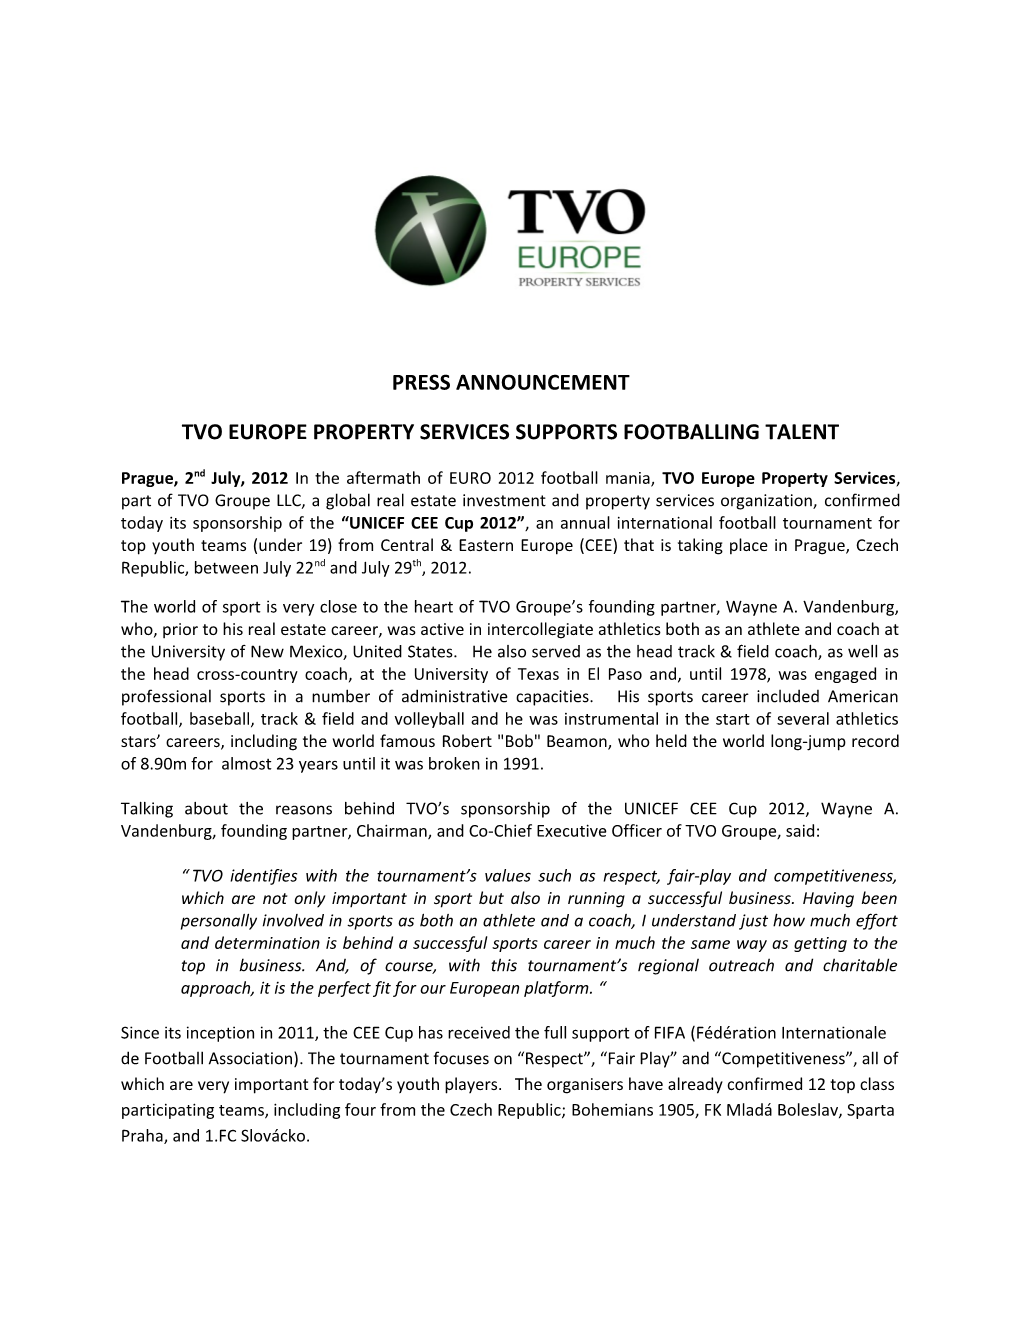 Tvo Europe Property Services Supports Footballing Talent